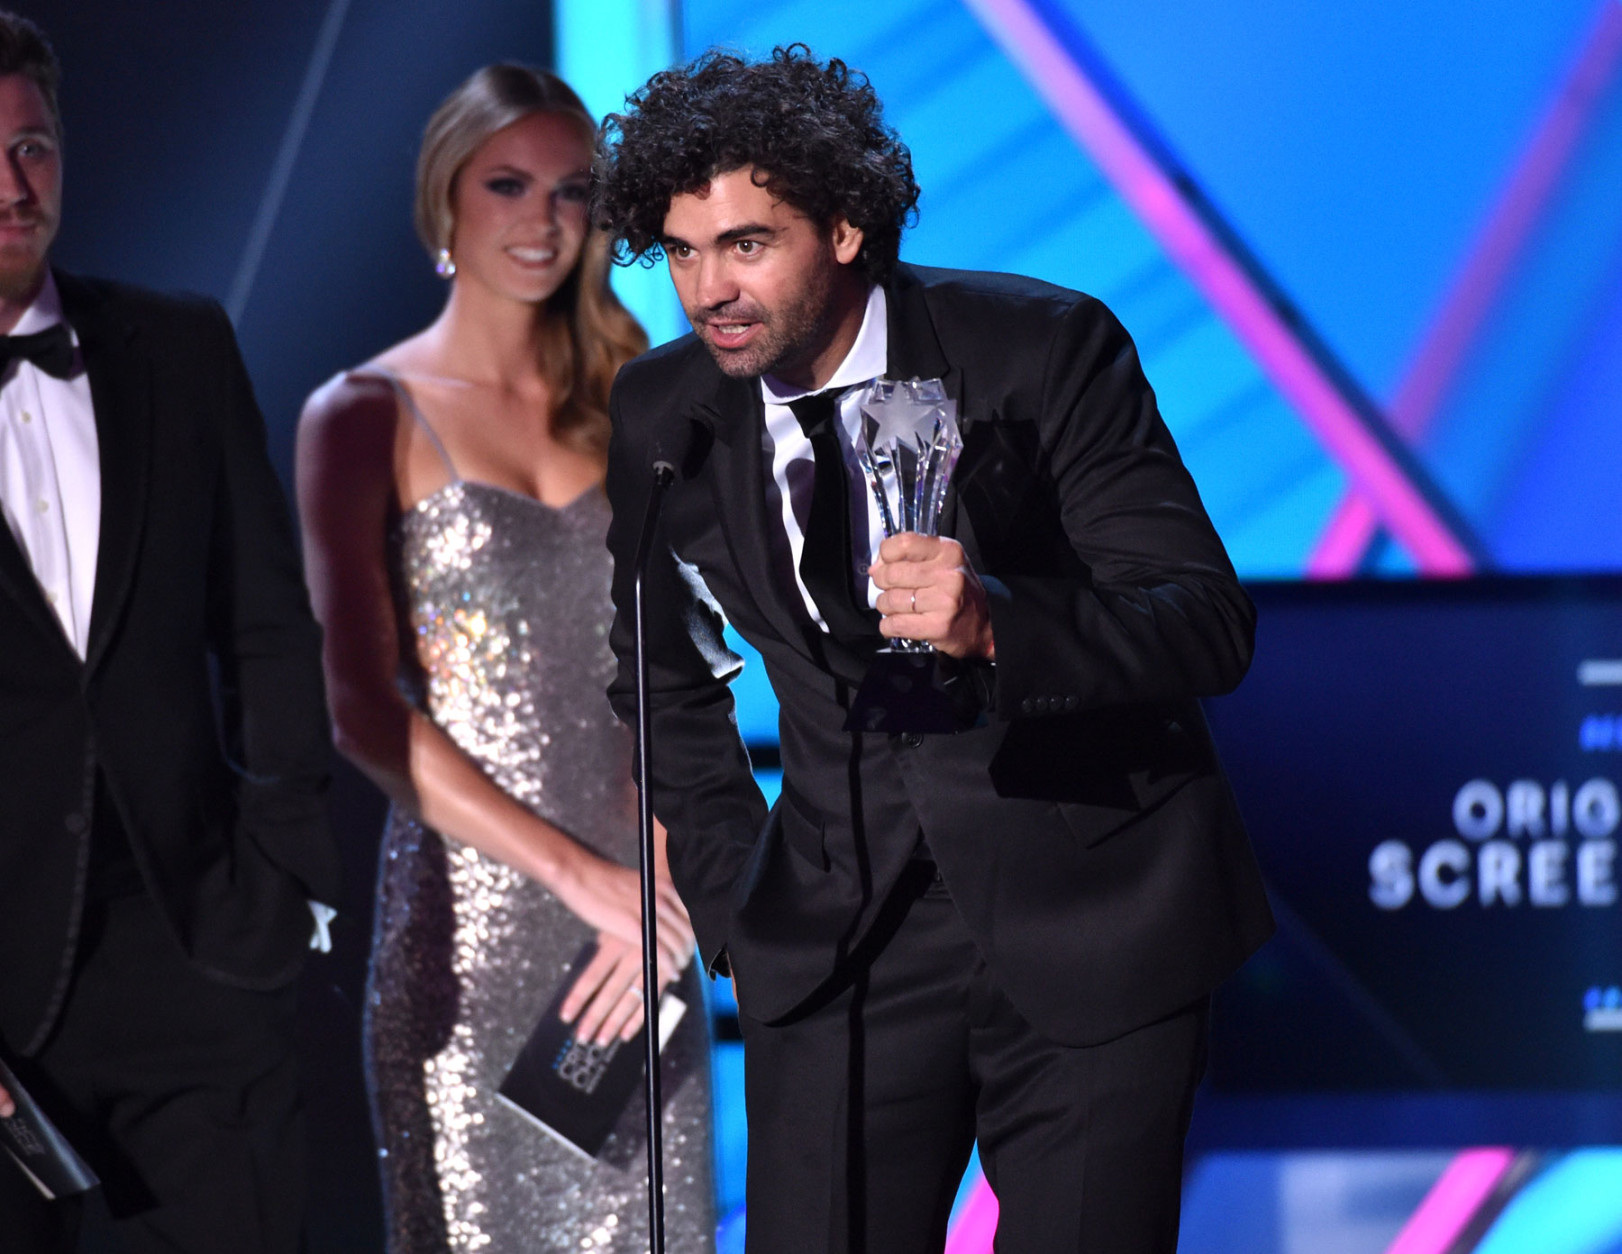 Armando Bo accepts the best original screenplay award for “Birdman” at the 20th annual Critics' Choice Movie Awards at the Hollywood Palladium on Thursday, Jan. 15, 2015, in Los Angeles. (Photo by John Shearer/Invision/AP)